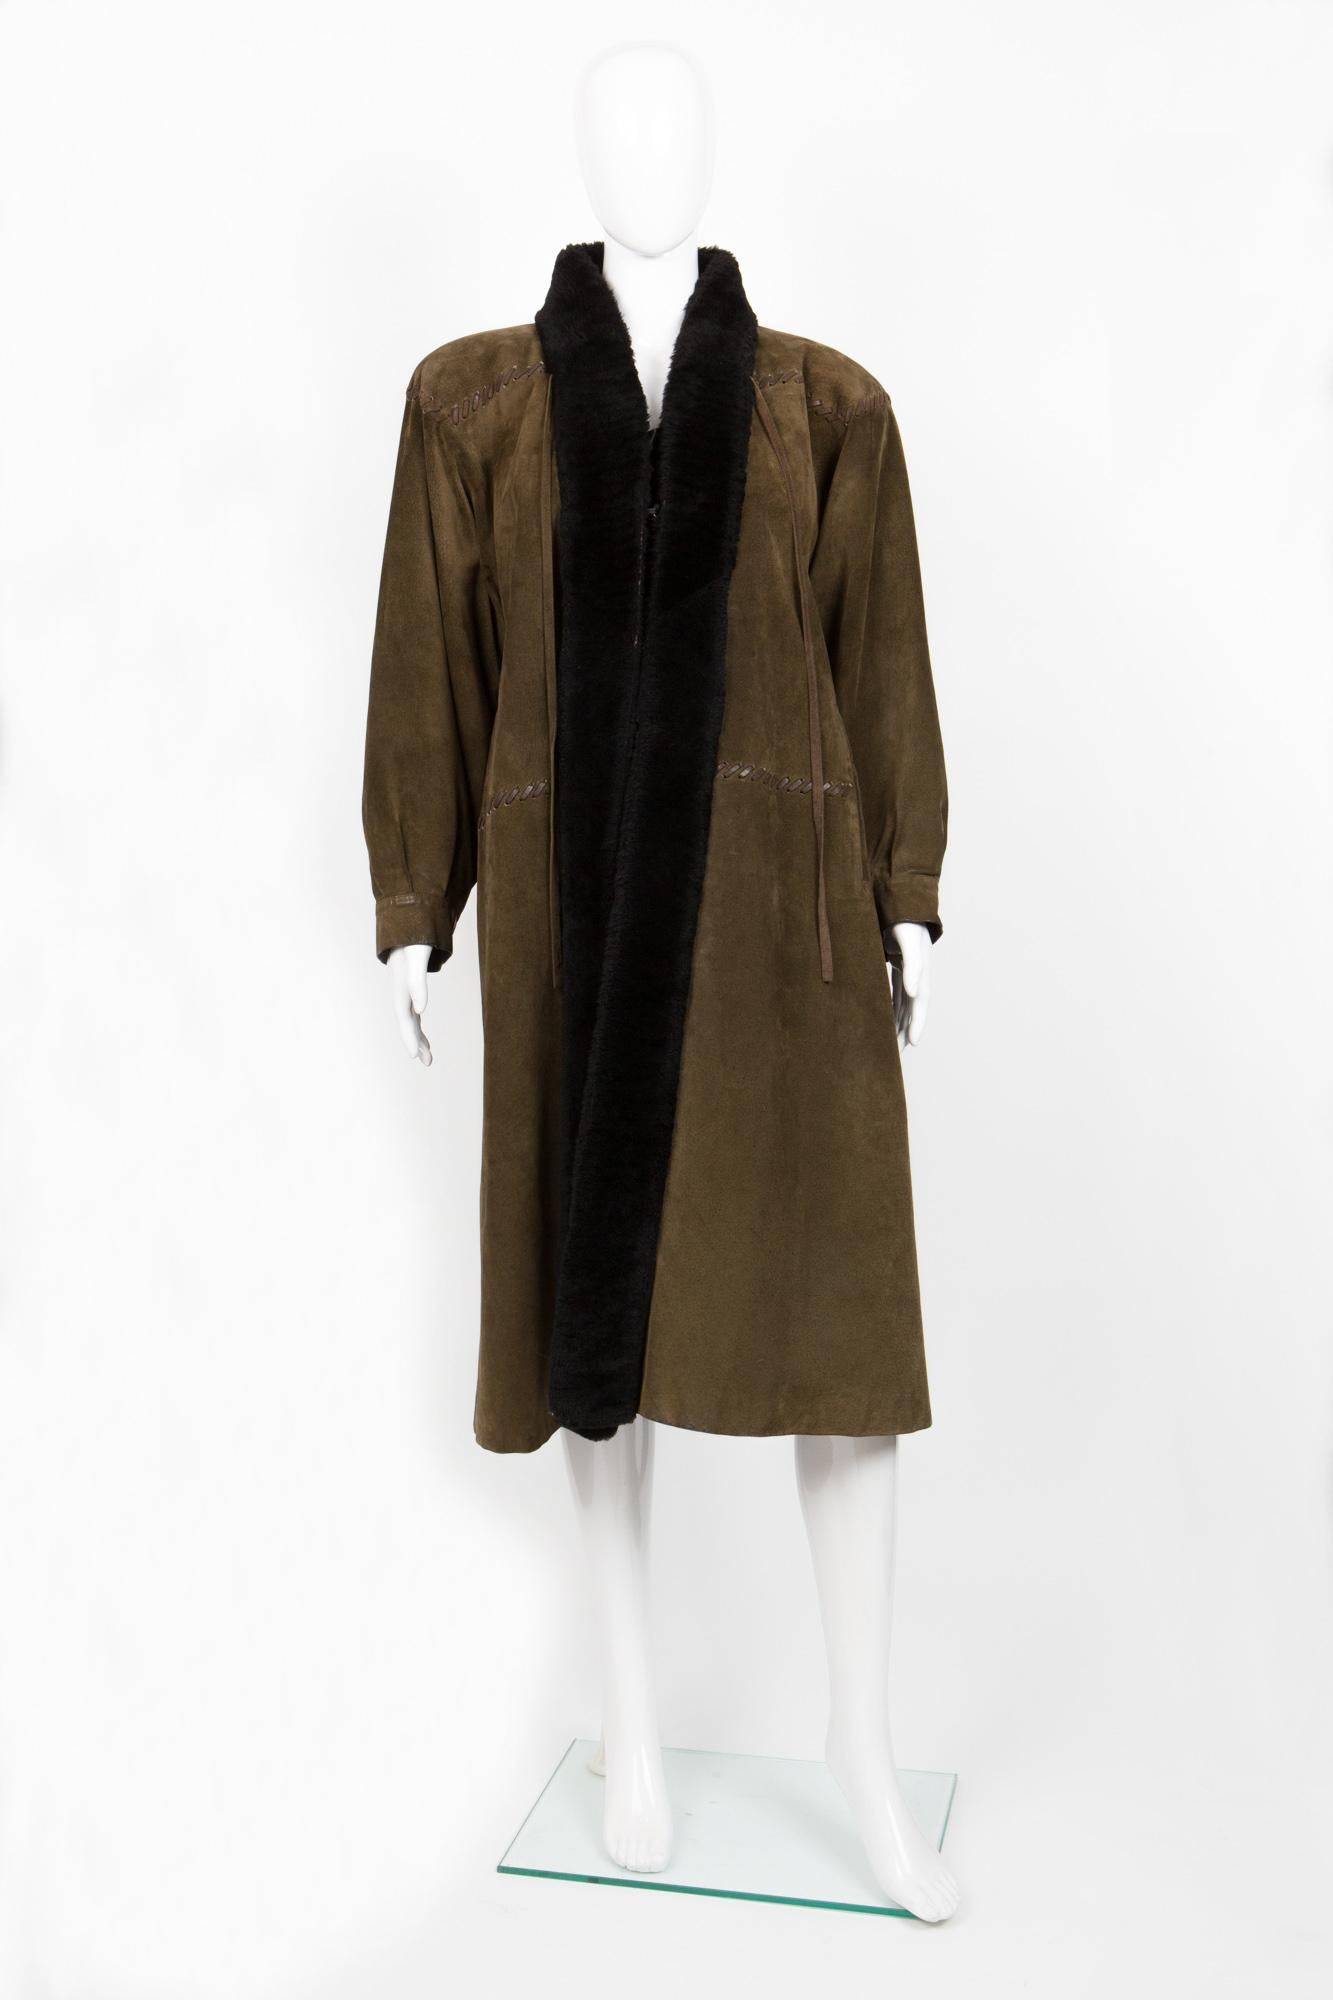 Saint Laurent khaki green suede long coat featuring  leather saddle stitchings, brown shearling full interior lining,  a front hook closure fastening.
Made in France. 
In vintage condition ( Due to his age, some suede parts & furs are